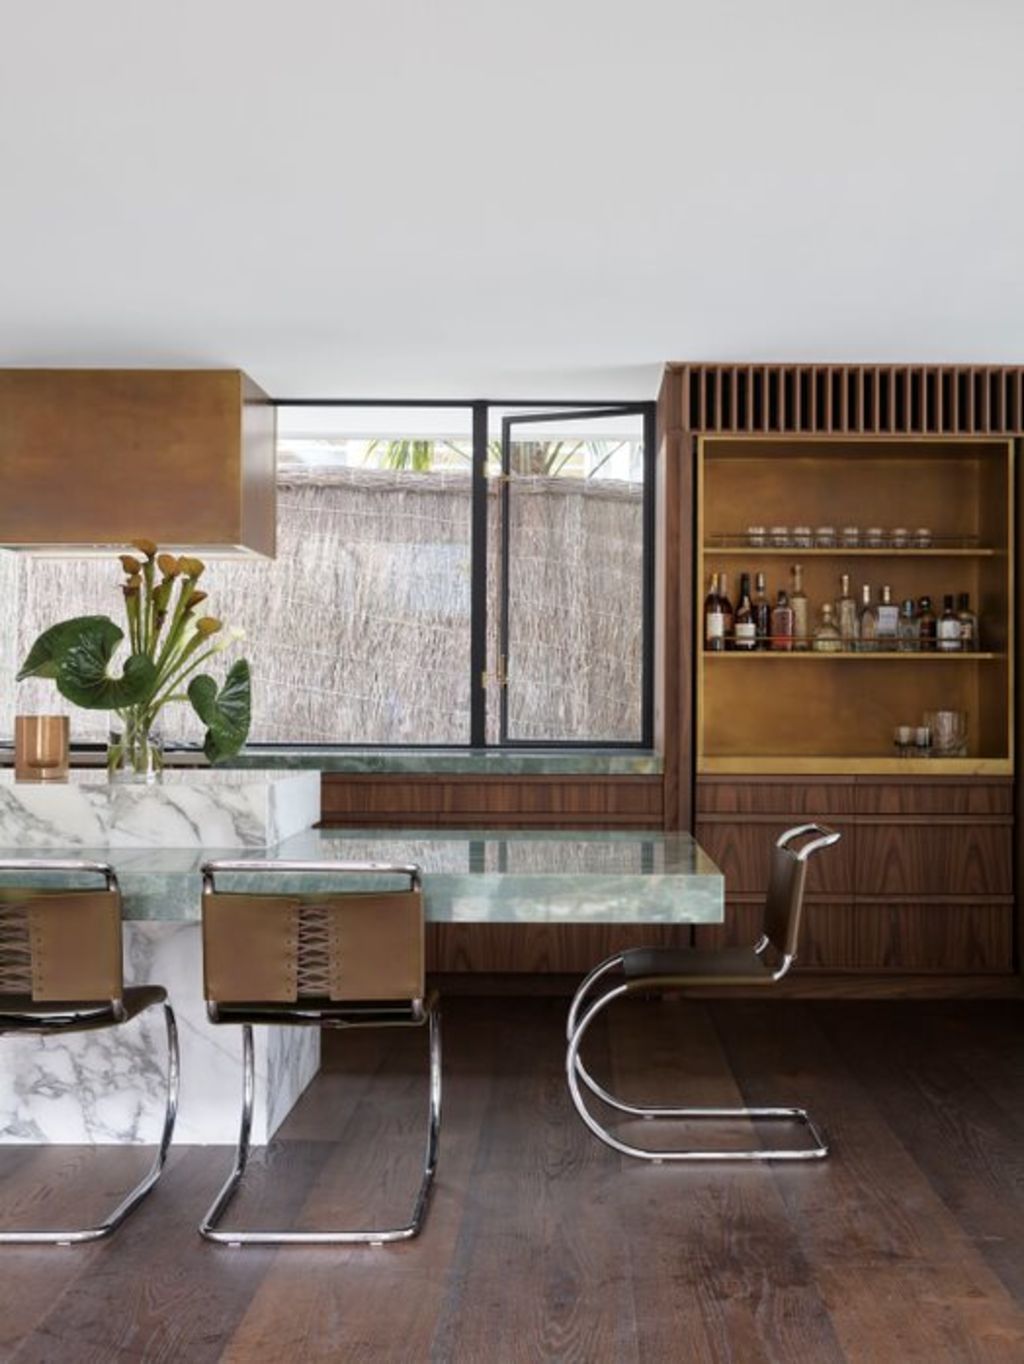 The kitchen has a combination of green and white marble. Photo: Anson Smart